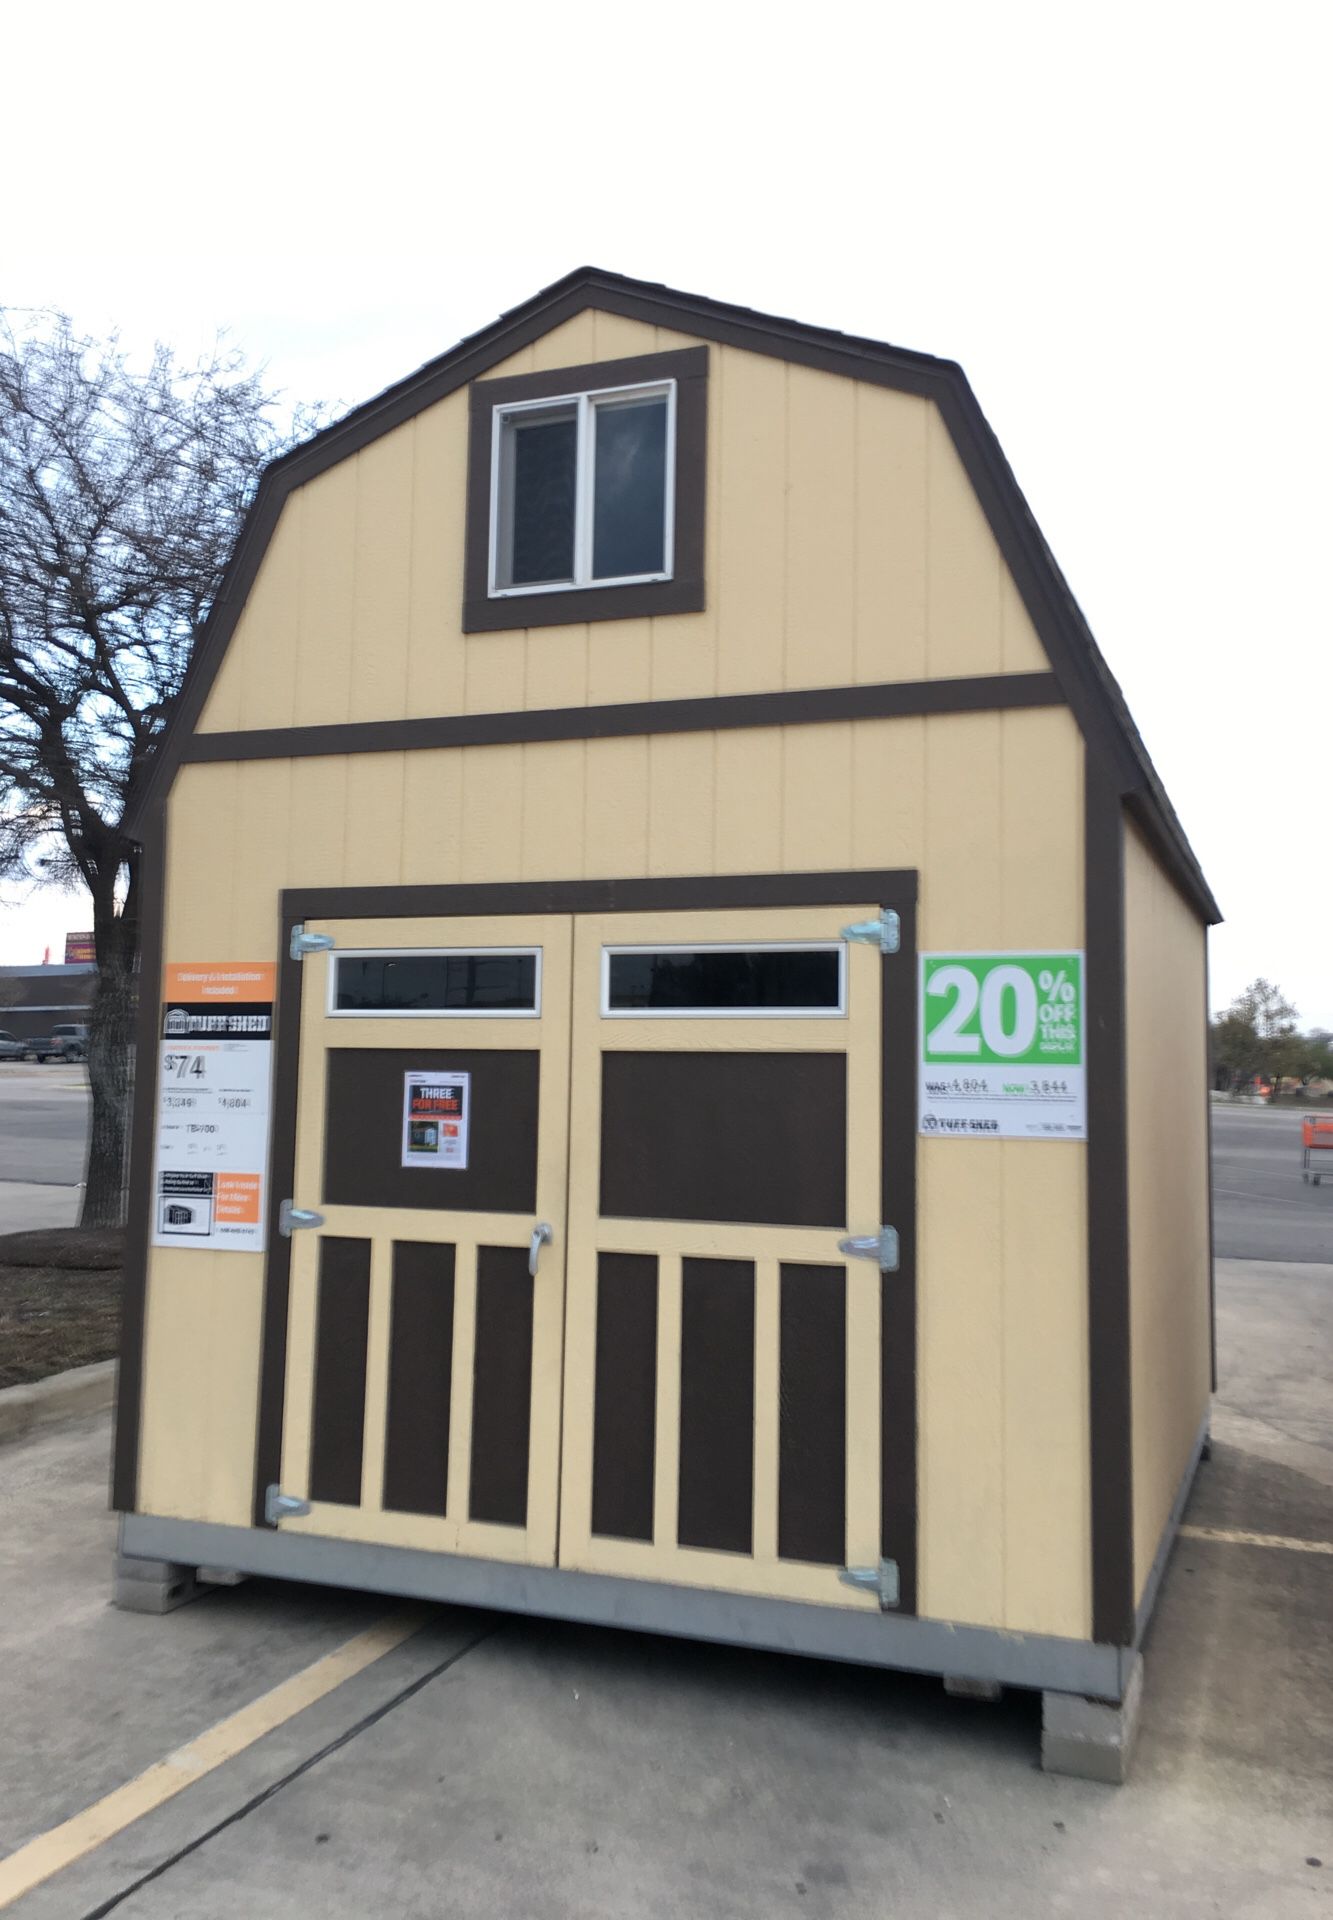 TUFF SHED TB700 10x12 Lot shed for sale as is Free delivery within 30 miles of store on hwy 281 N